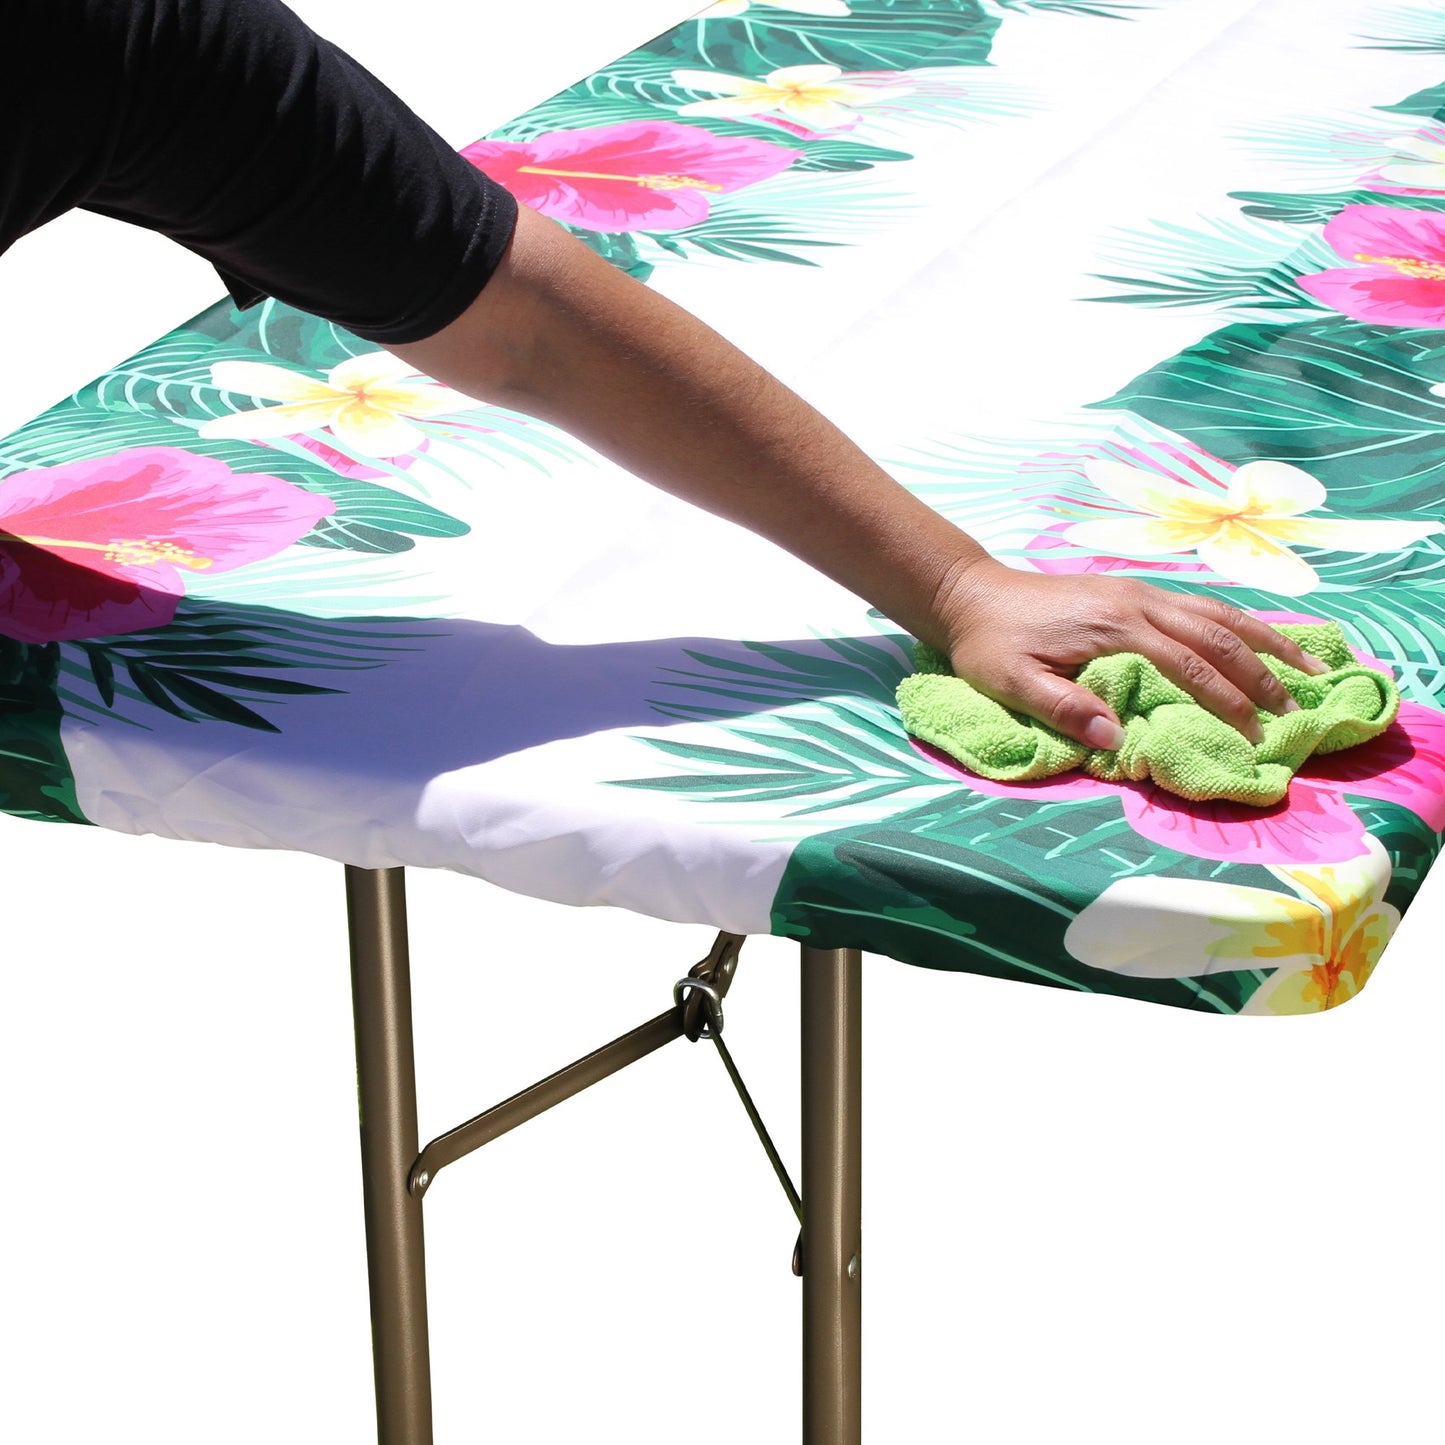 TableCloth PLUS 72" Summer Fitted Polyester Tablecloth for 6' Folding Tables can be wiped clean with a cloth